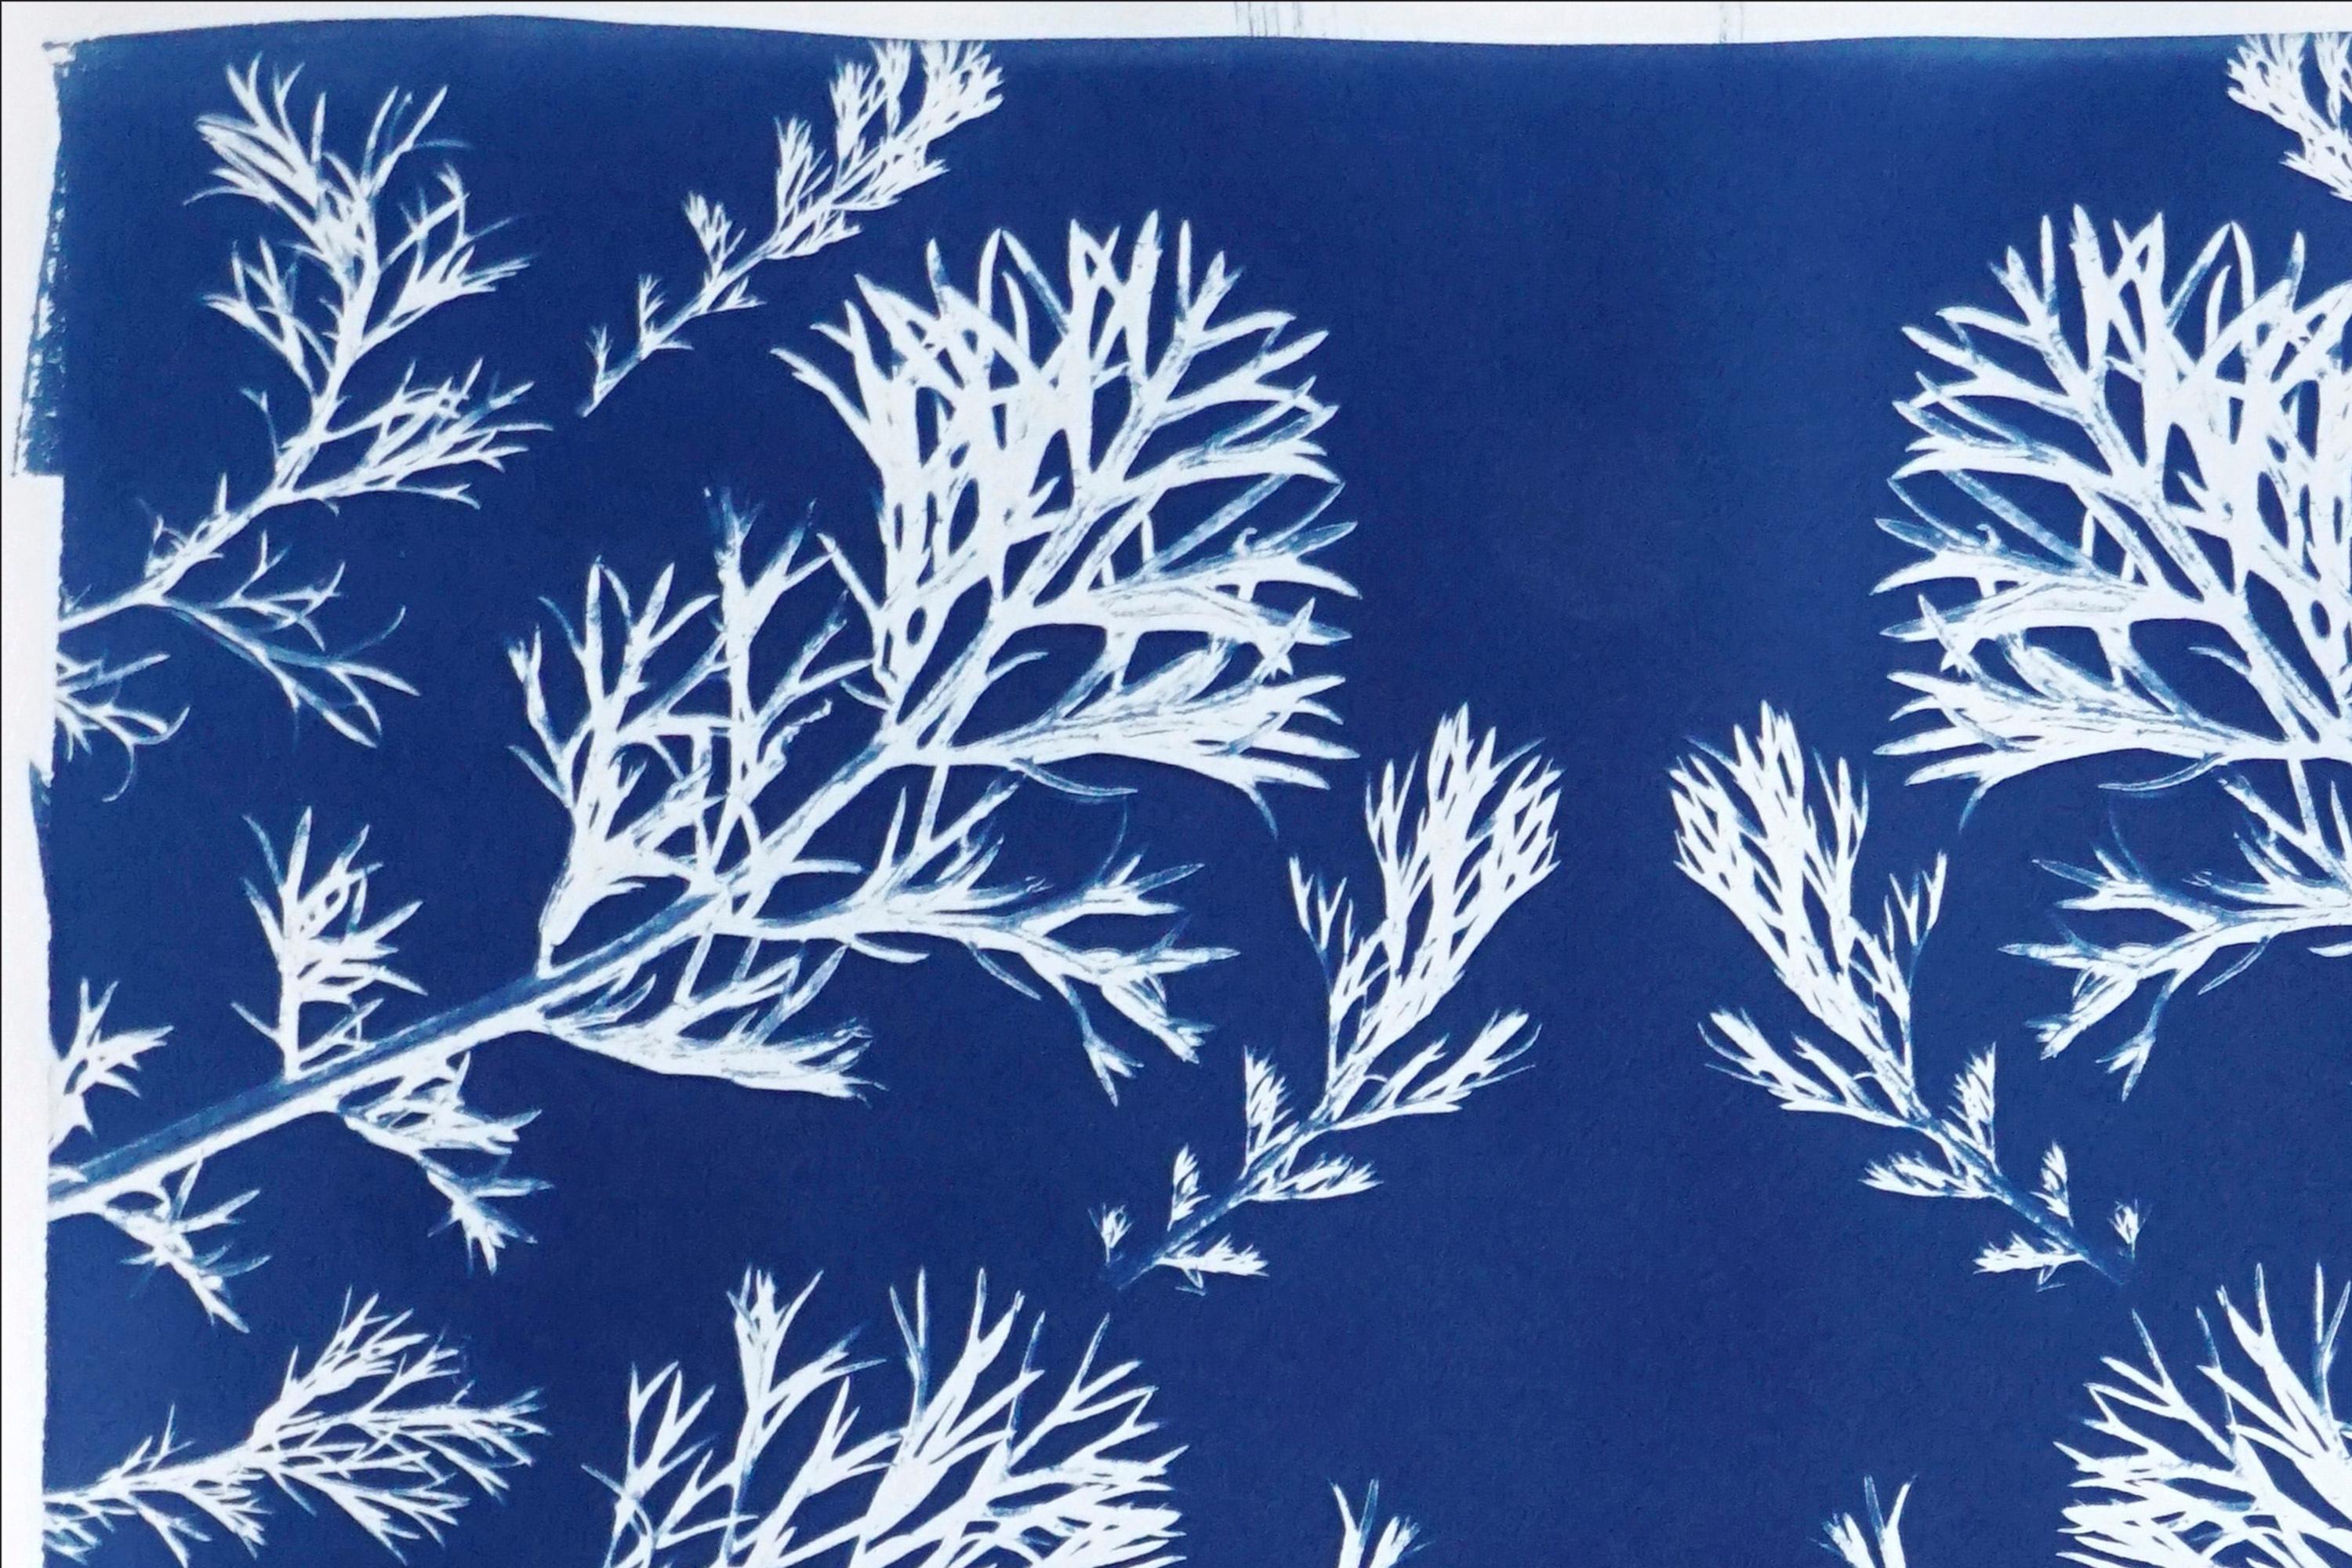 Classic Botanical Cyanotype, Handmade Using Natural Sunlight, Limited Edition  - Blue Still-Life Print by Kind of Cyan